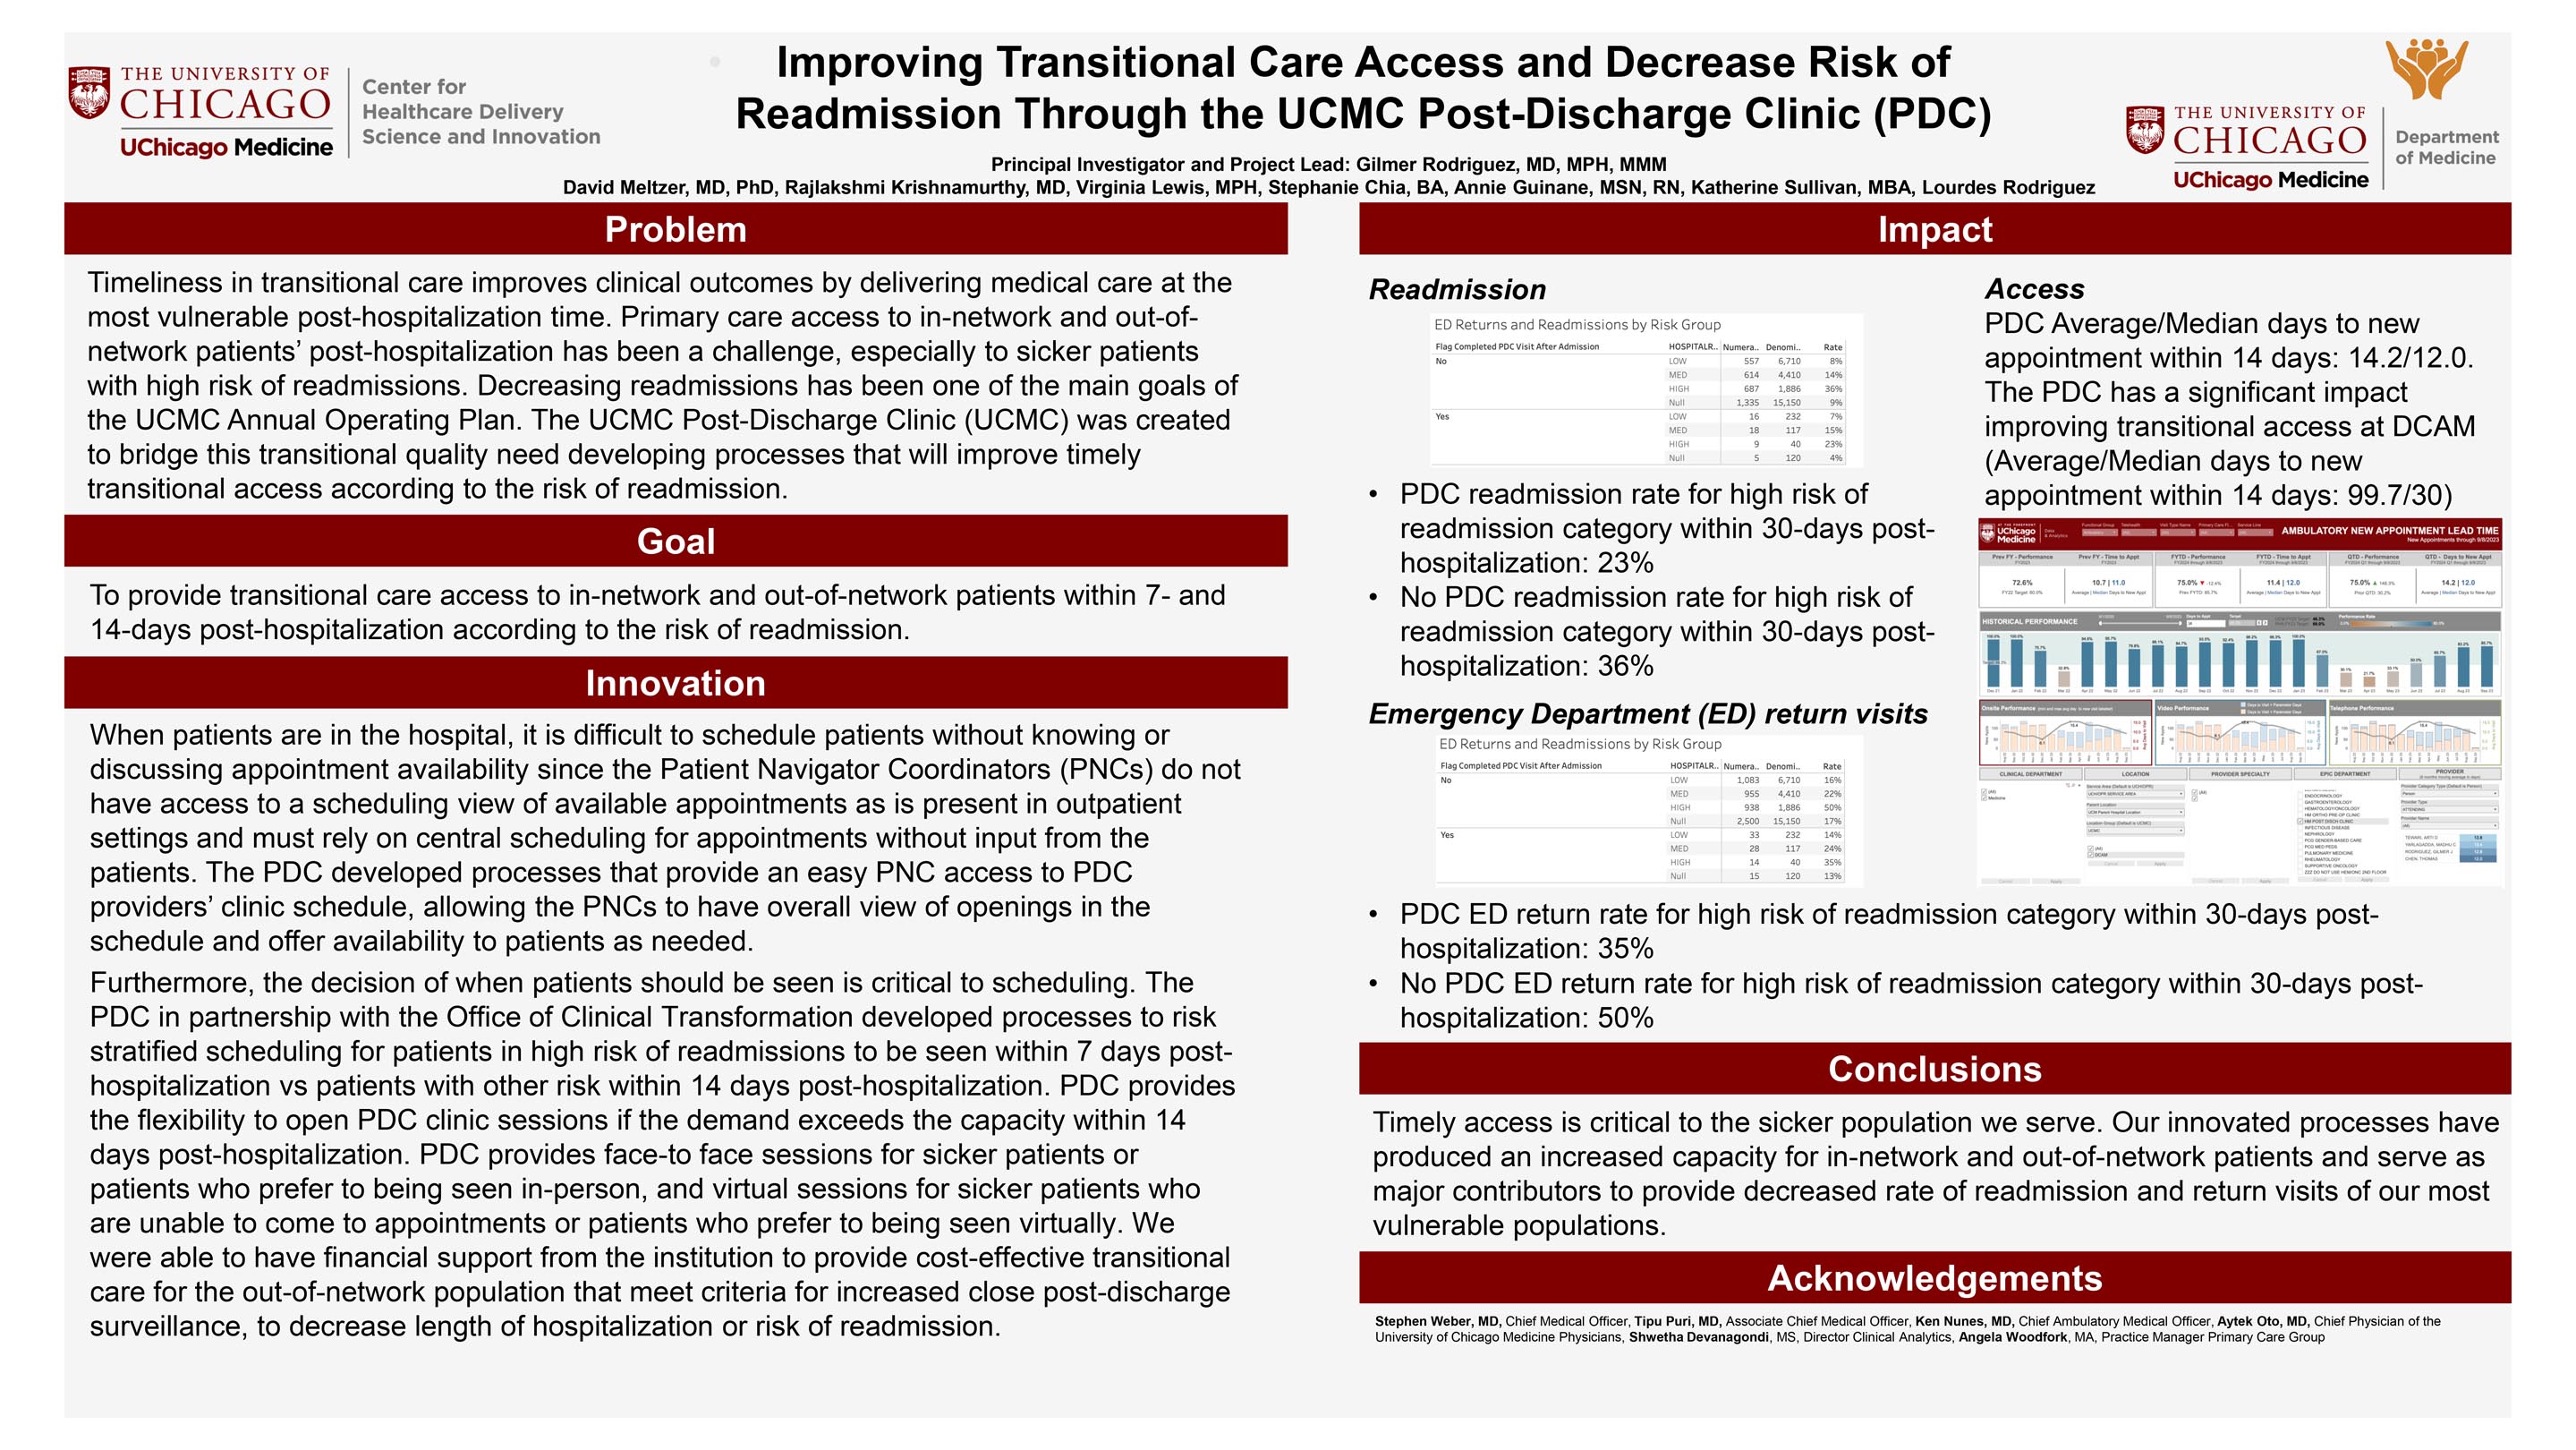 RODRIGUEZ_Improving Transitional Care Access and Decrease Risk of Readmission Through the UCMC Post-Discharge Clinic